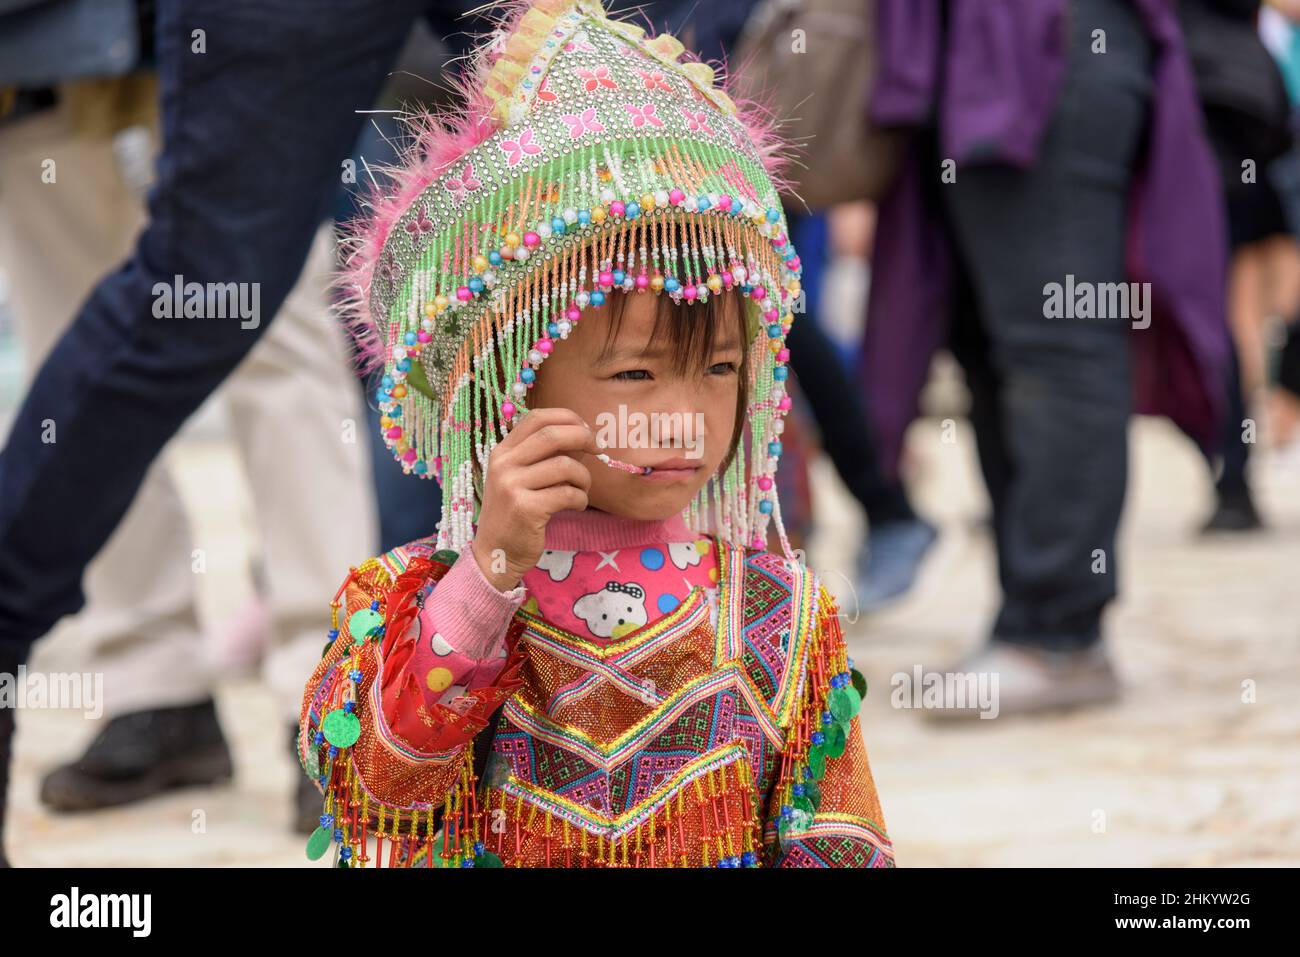 A young girl, wearing traditional Hmong tribe clothing, waits to pose for photographs by tourists in the town square, Sapa (Sa Pa), Lao Cai, Vietnam Stock Photo